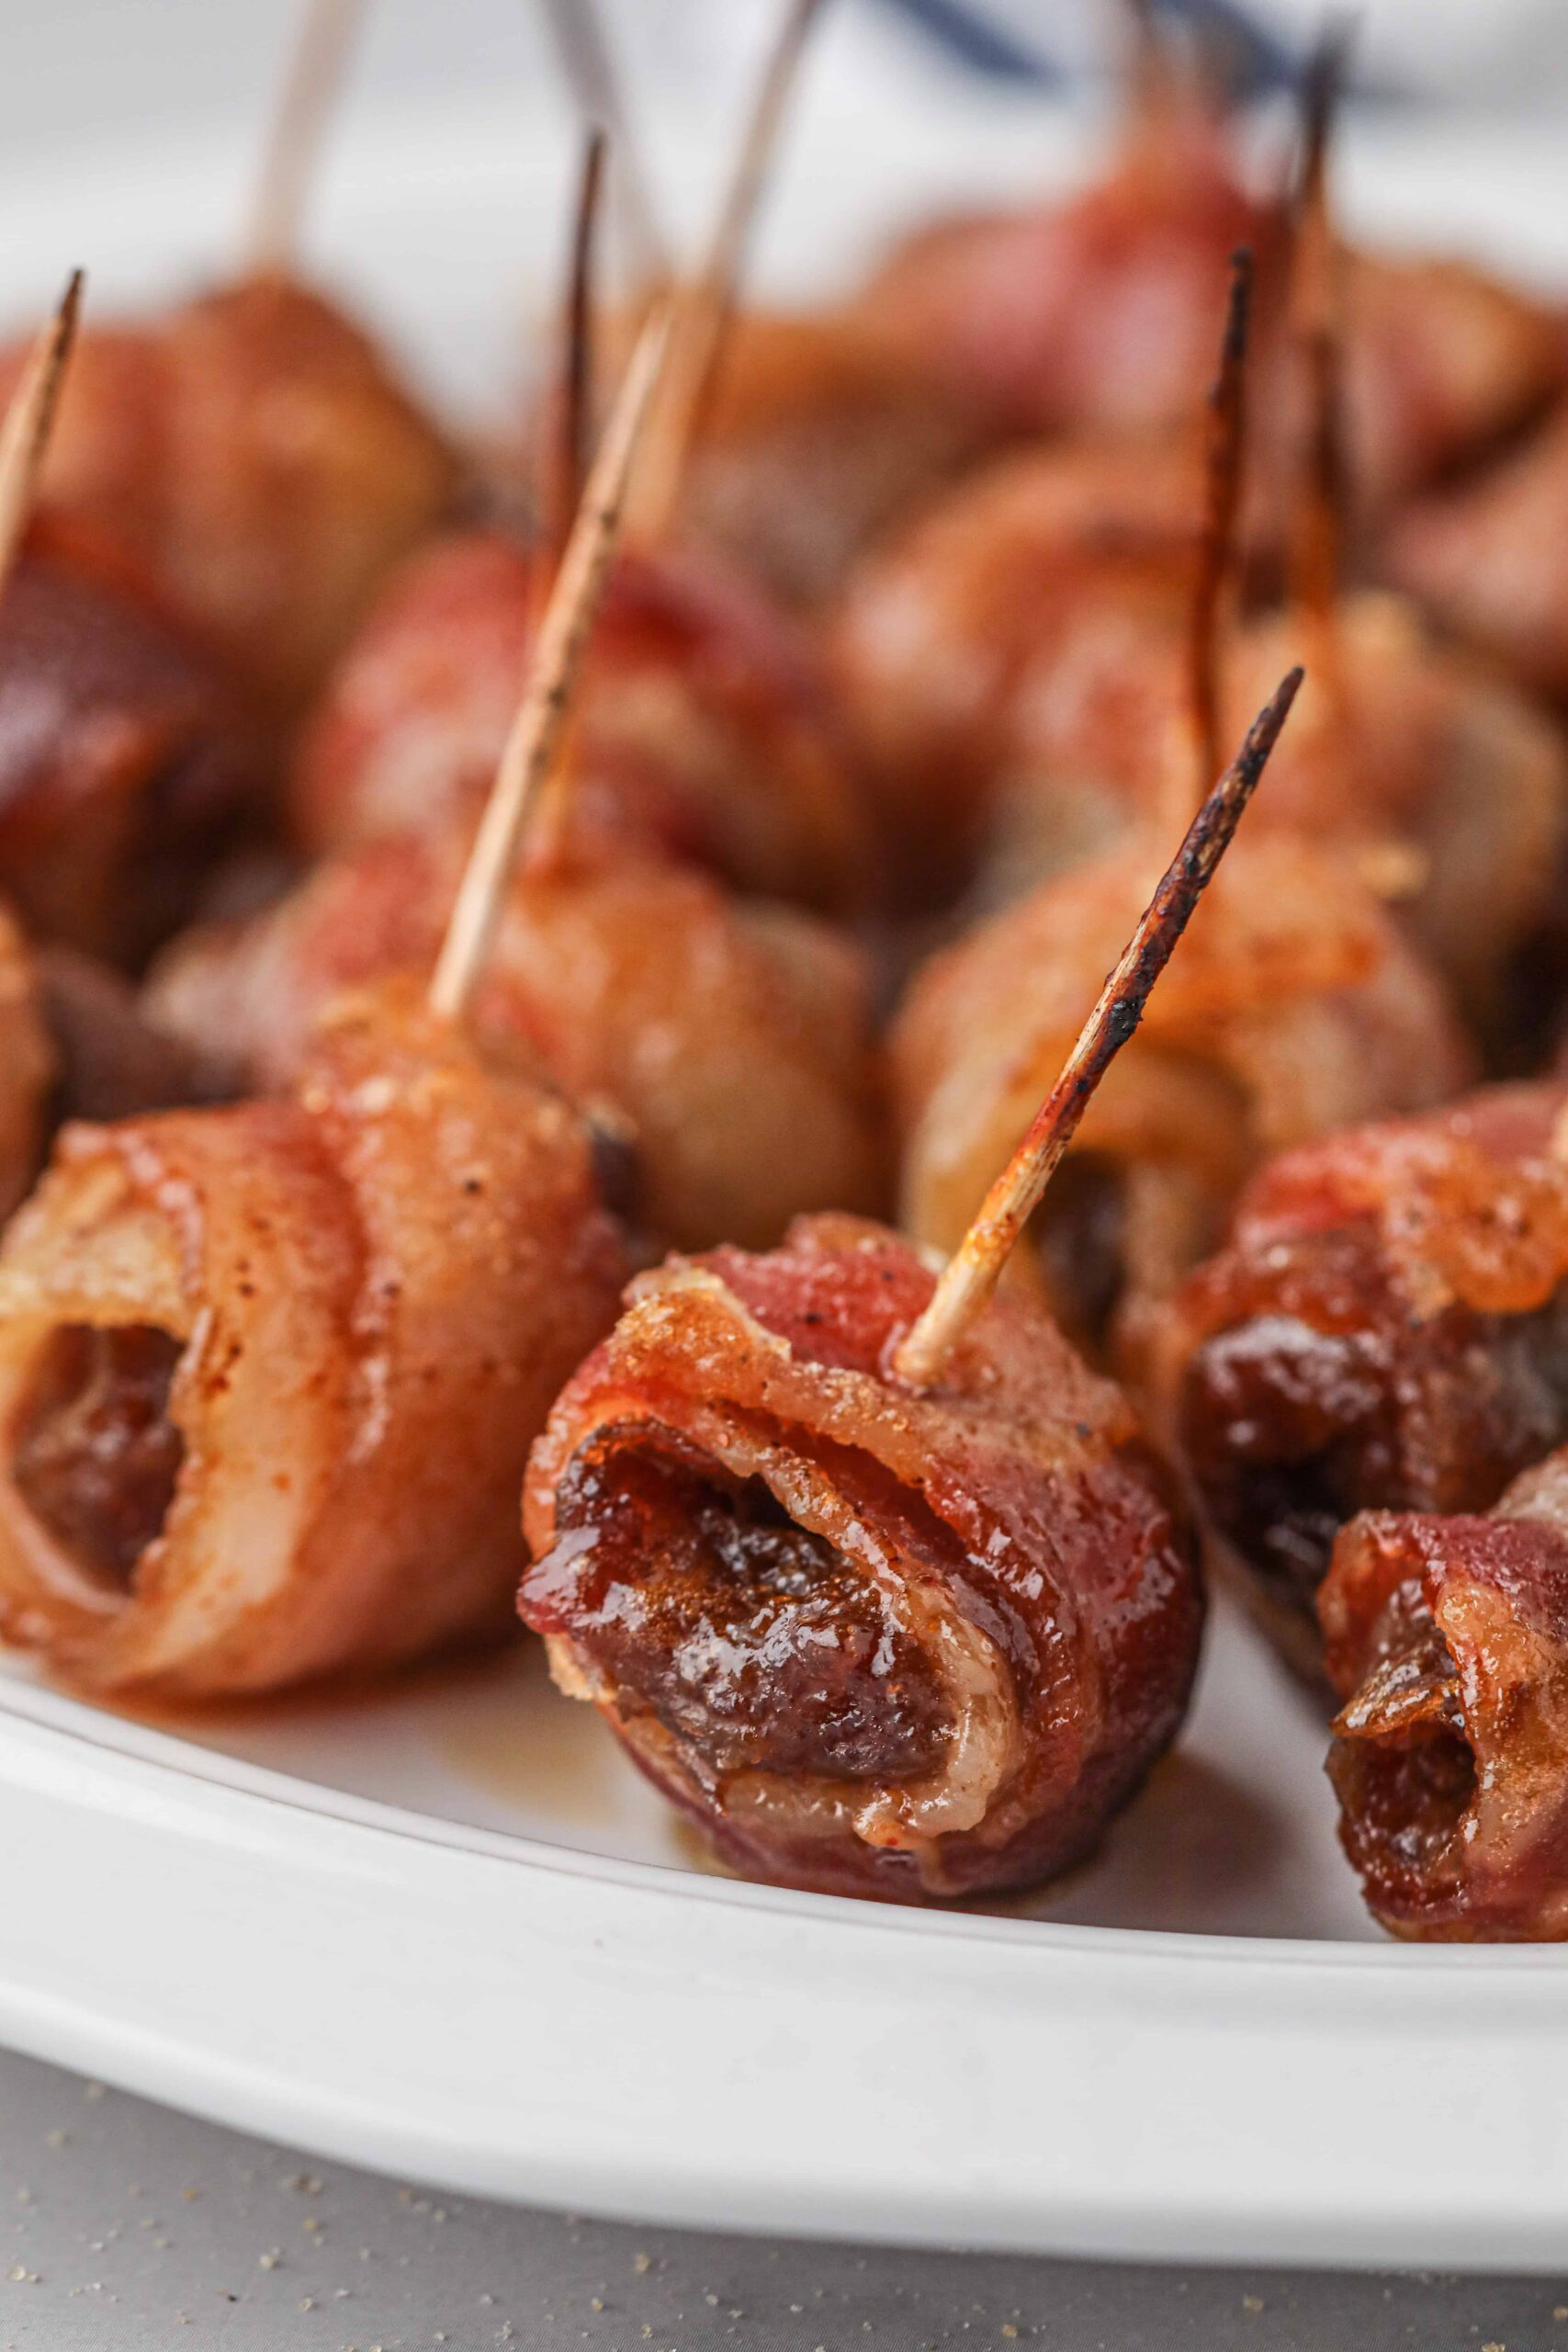 Close-up shot of a juicy, saucy looking bacon-wrapped date. 